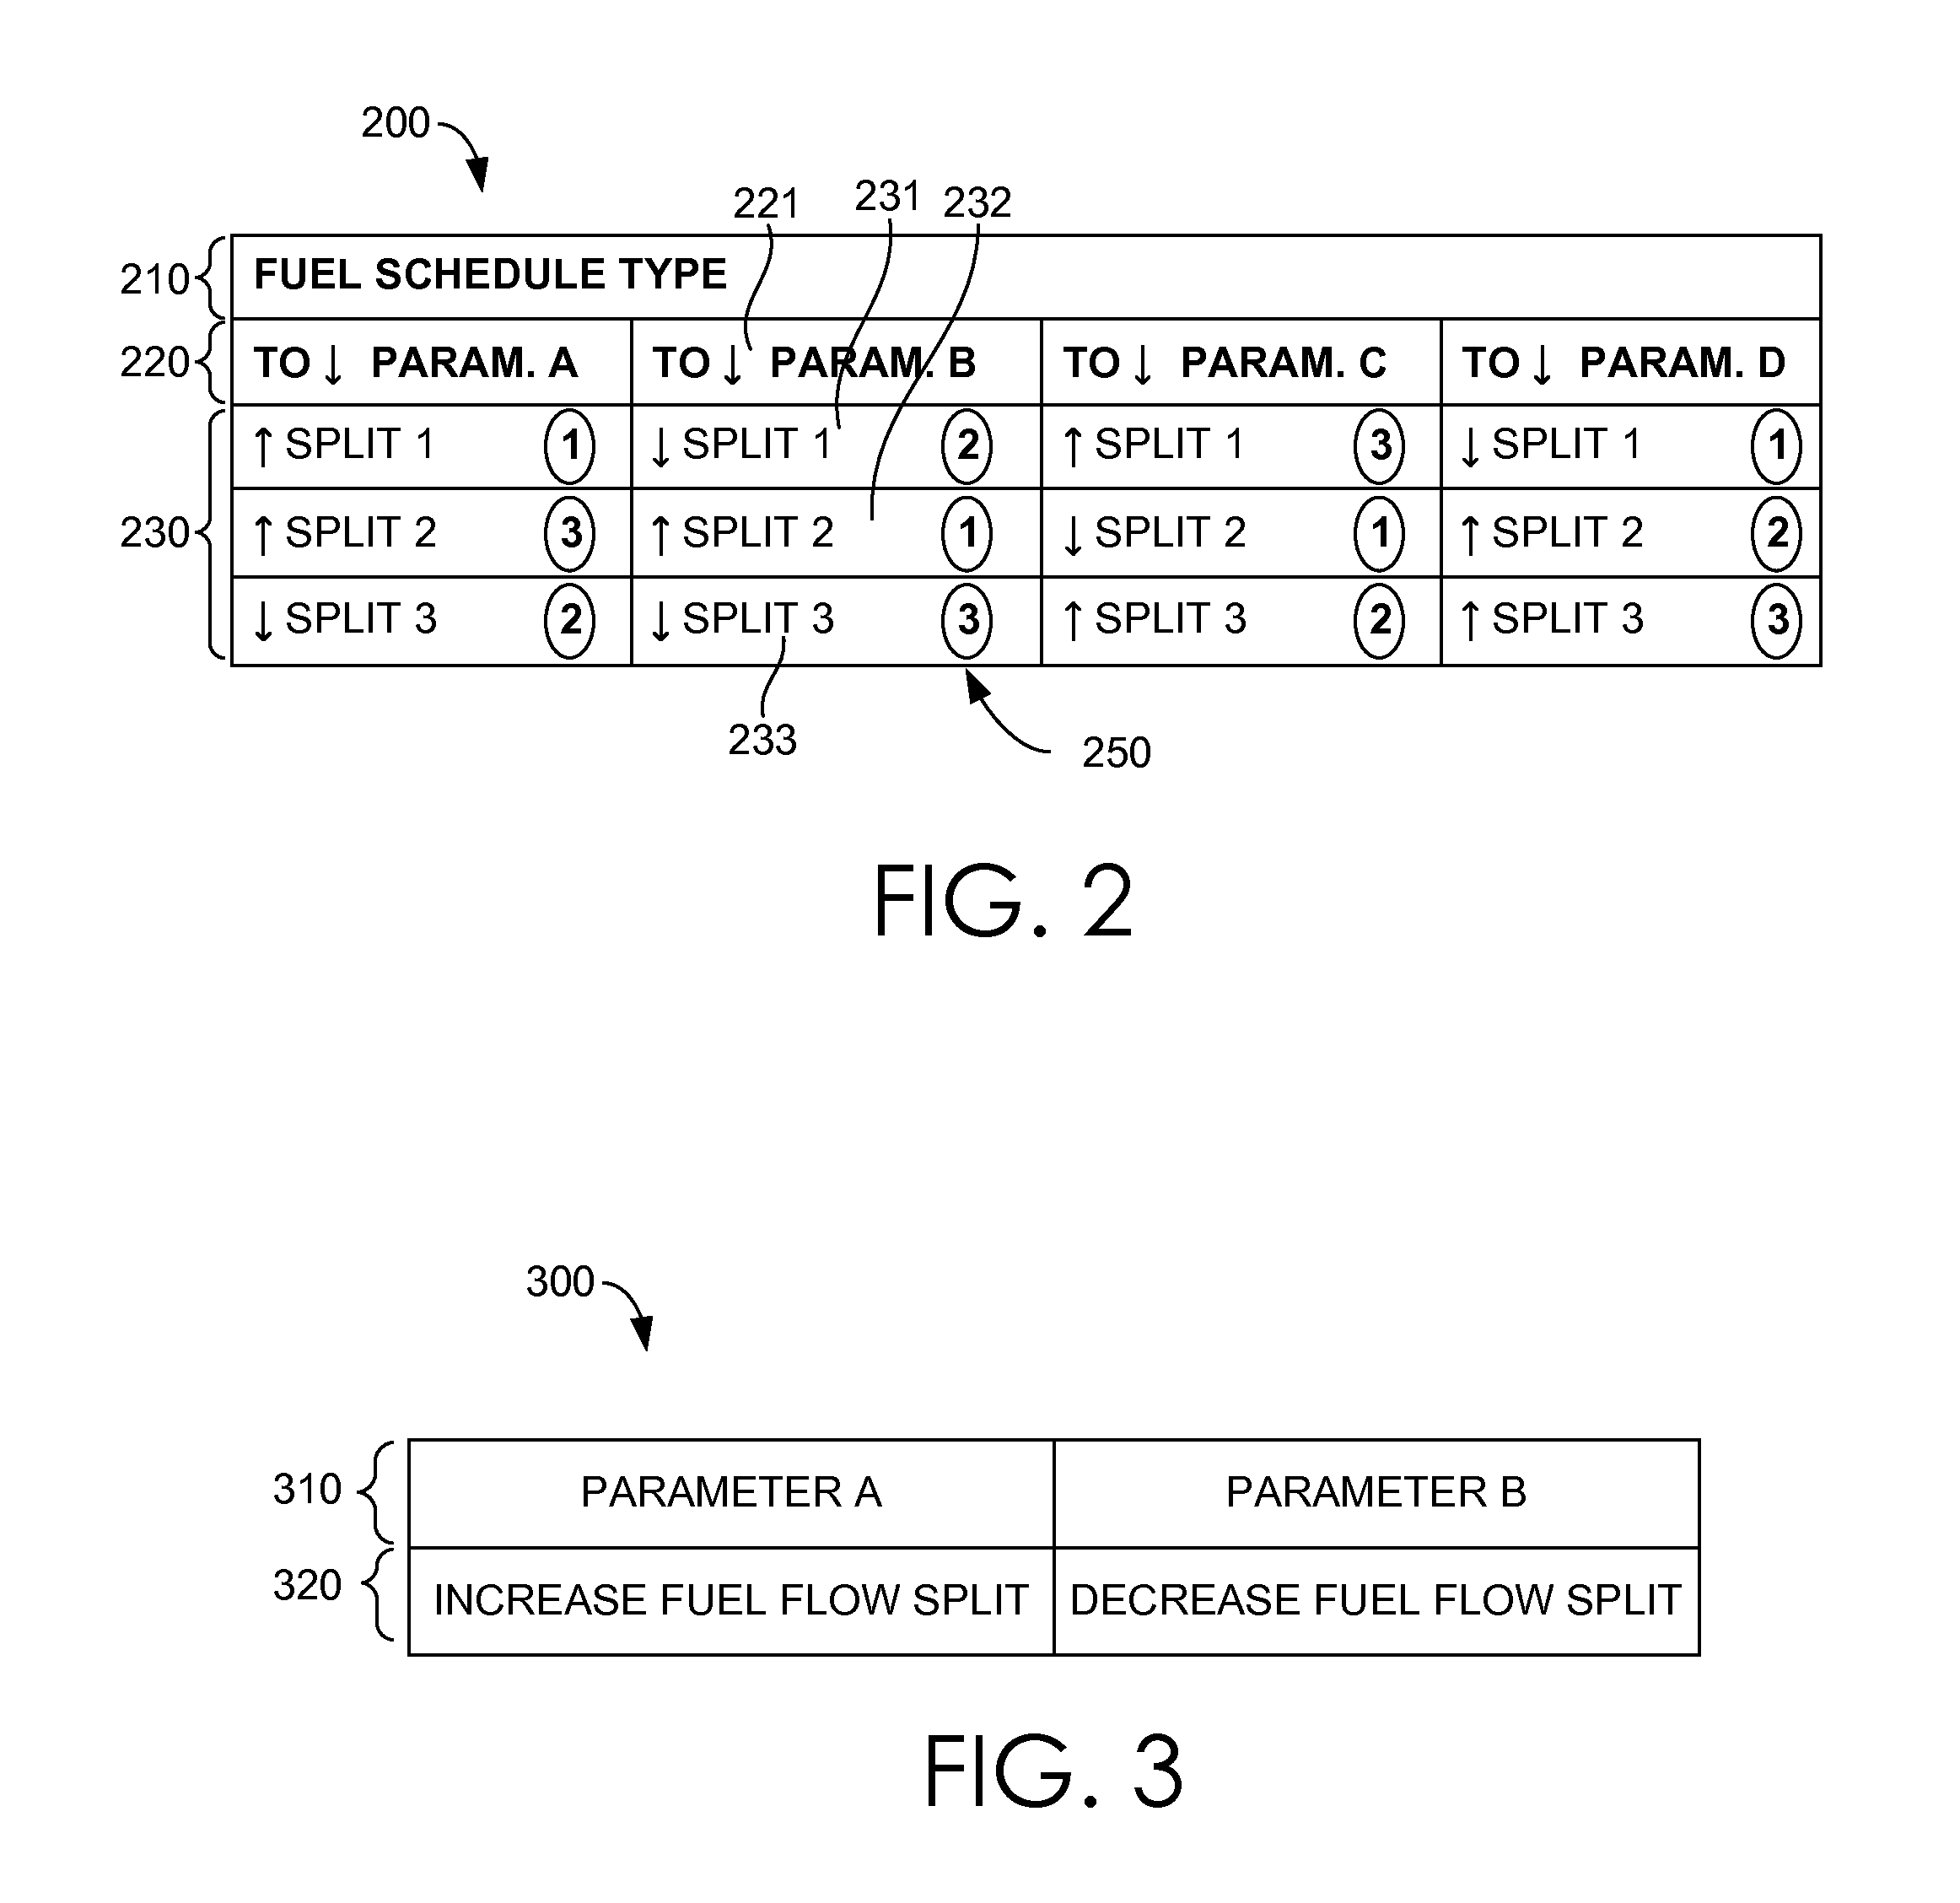 Automated extended turndown of a gas turbine engine combined with incremental tuning to maintain emissions and dynamics